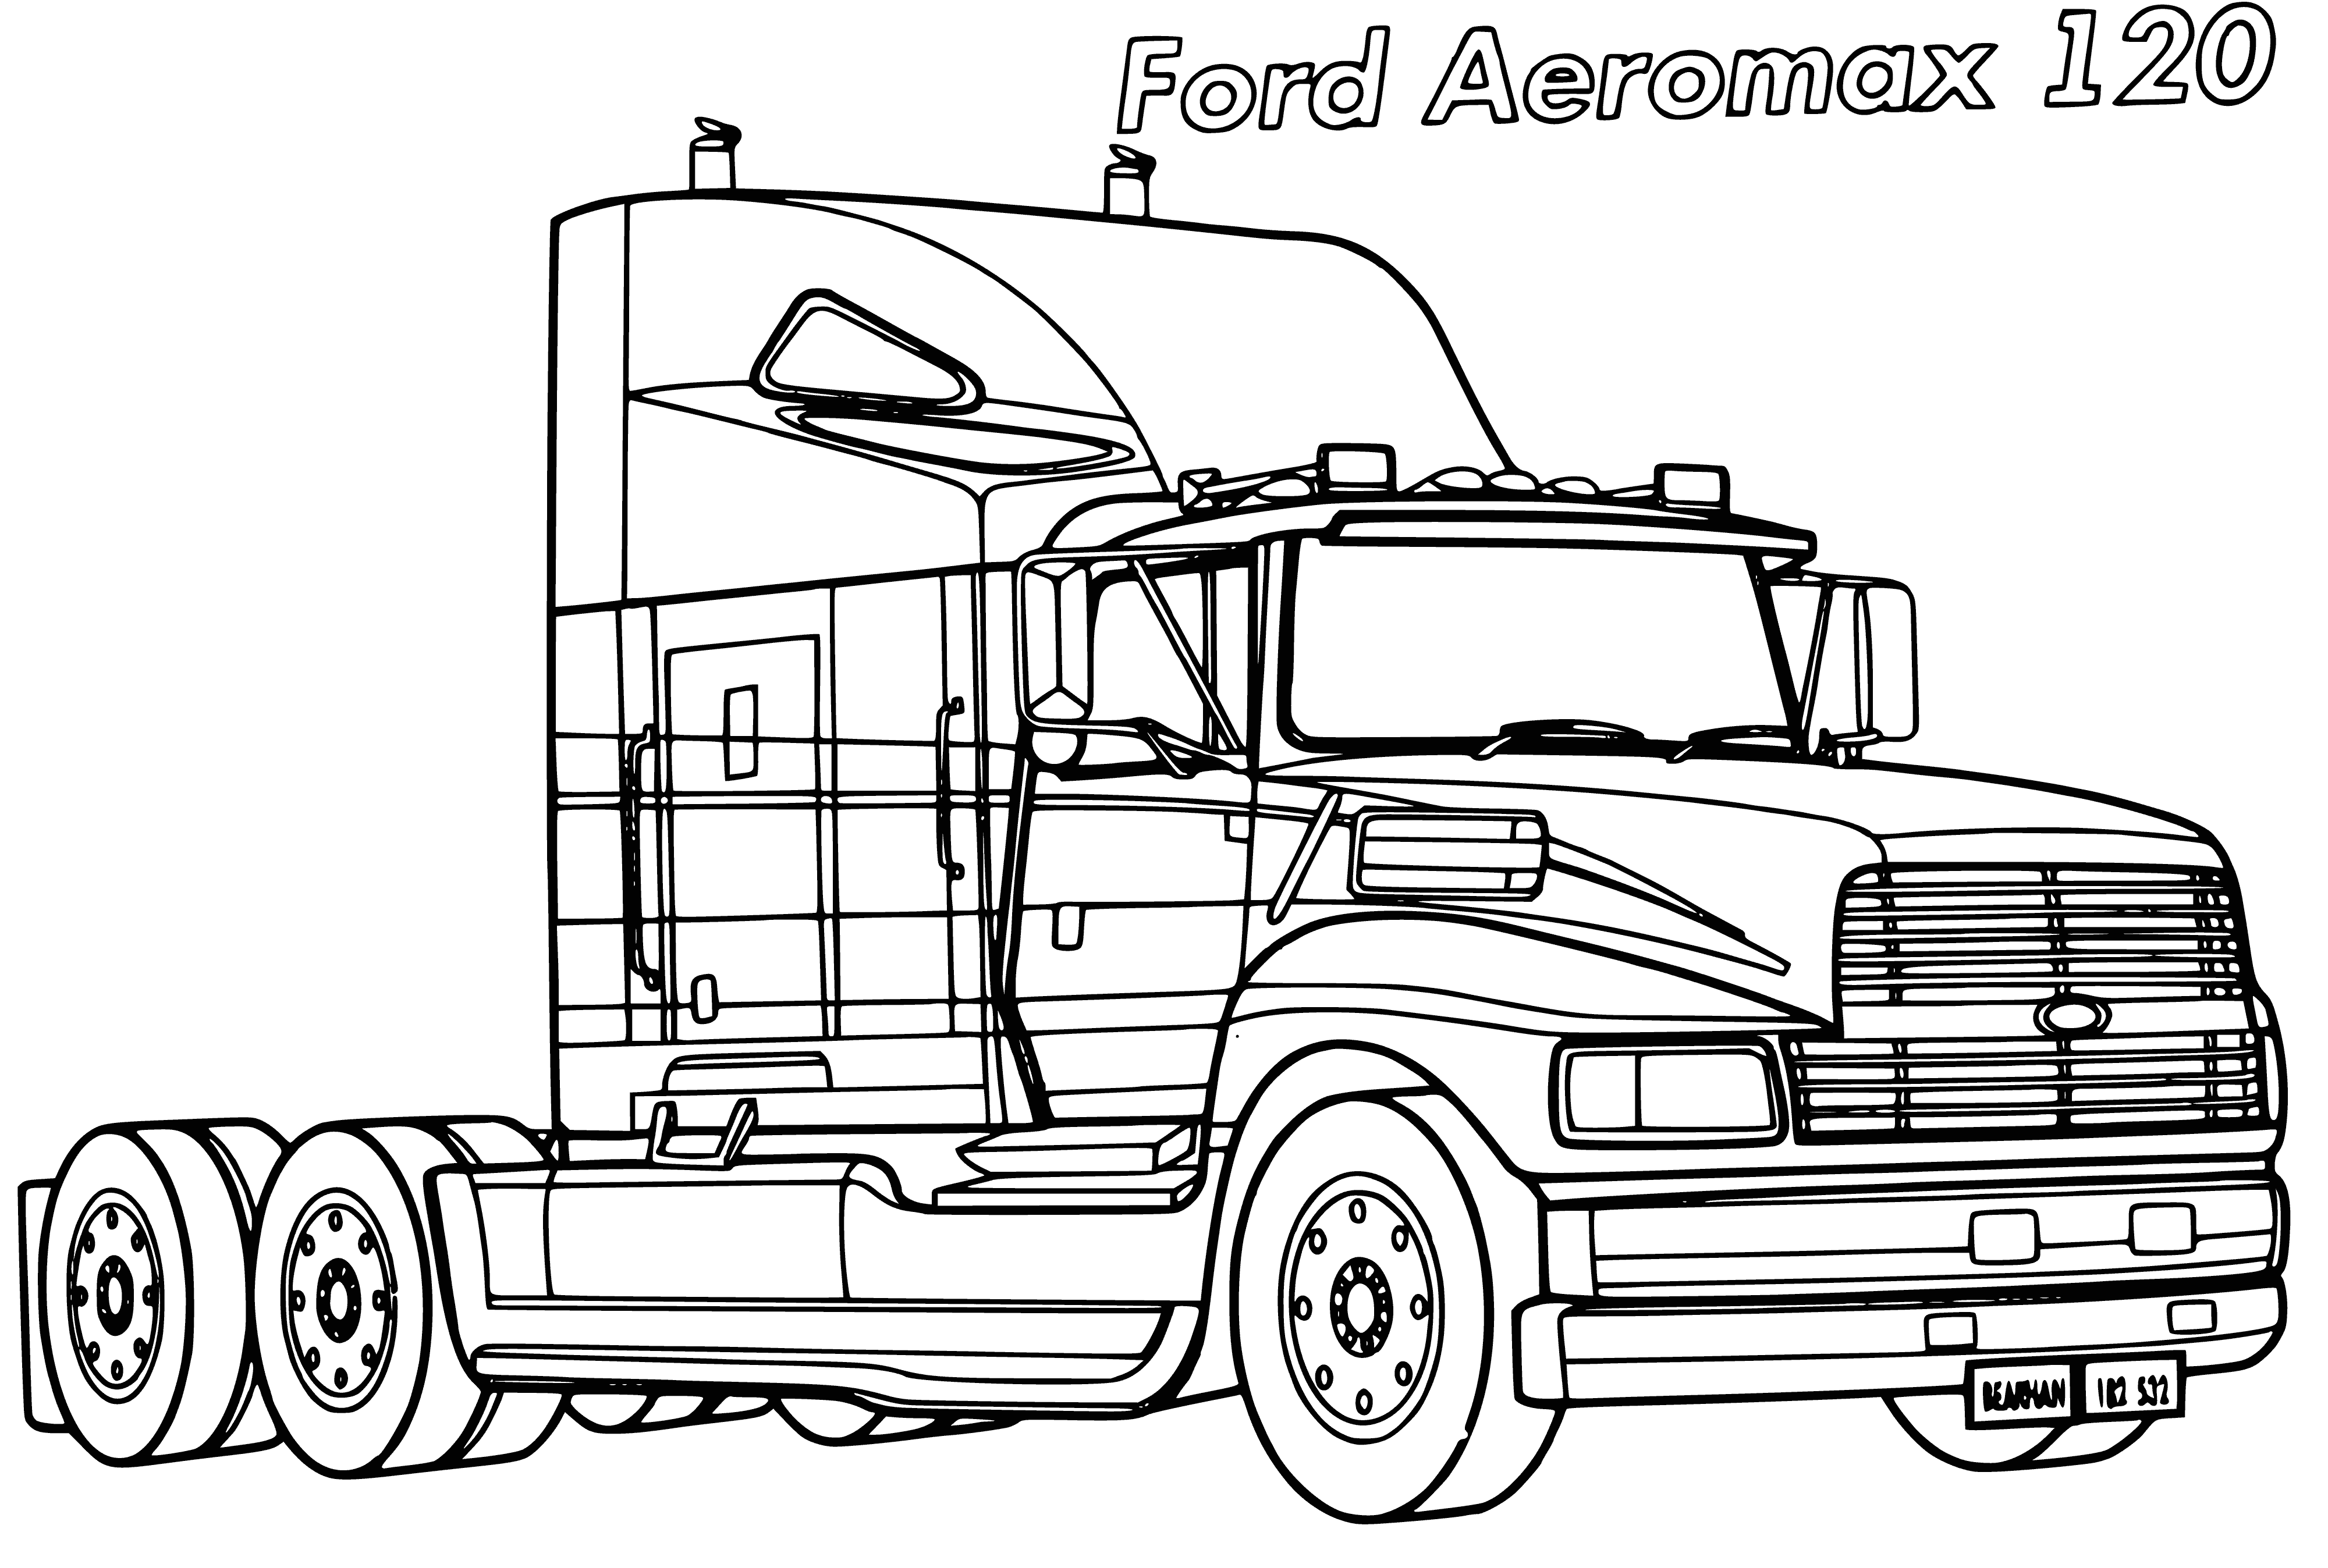 coloring page: 3 trucks: Ford Aeromax 120 (blue/white cab), tractor (red/white cab), dump truck (white/blue cab).